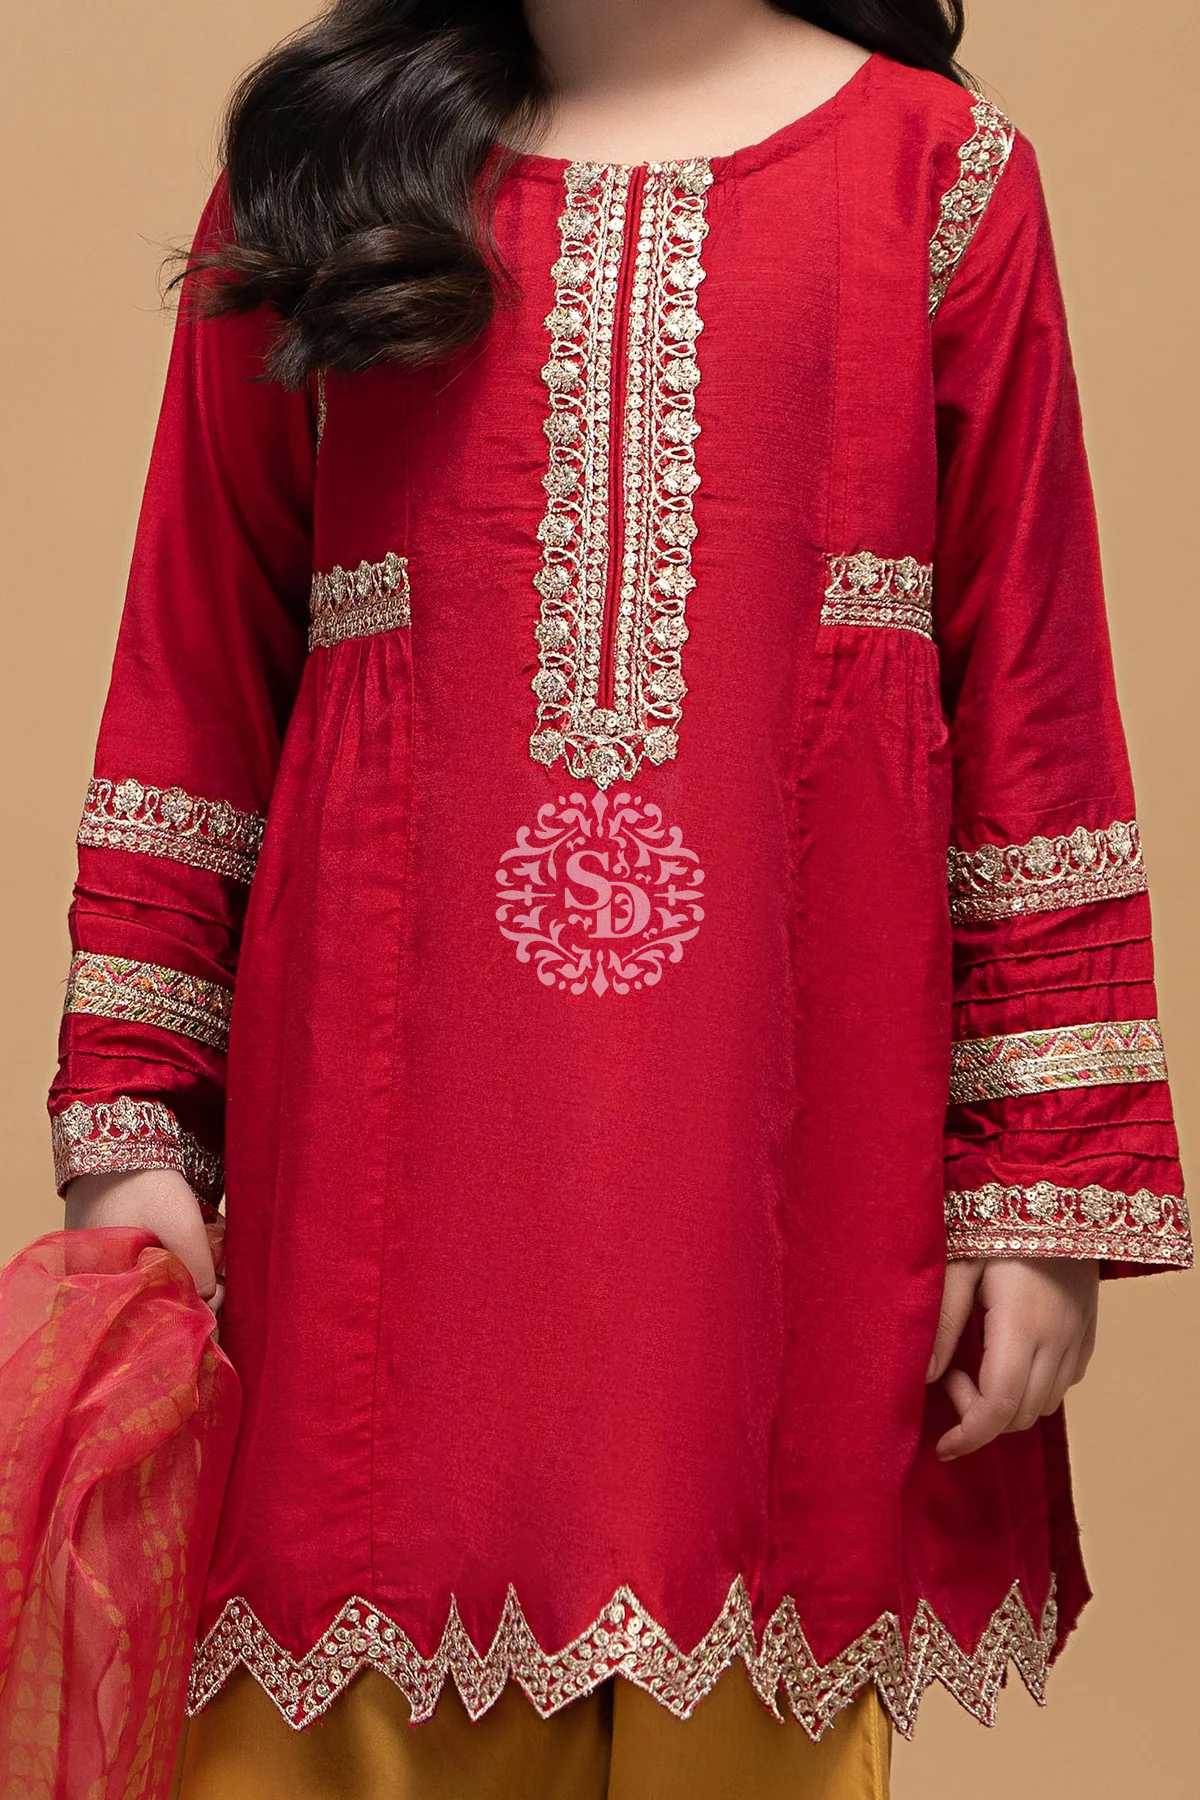 SAI DRESSES PRESENT D.NO 26 READY TO CLASSY WEAR DESIGNER PAKISTANI KIDS COMBO SUITS IN WHOLESALE RATE IN SURAT